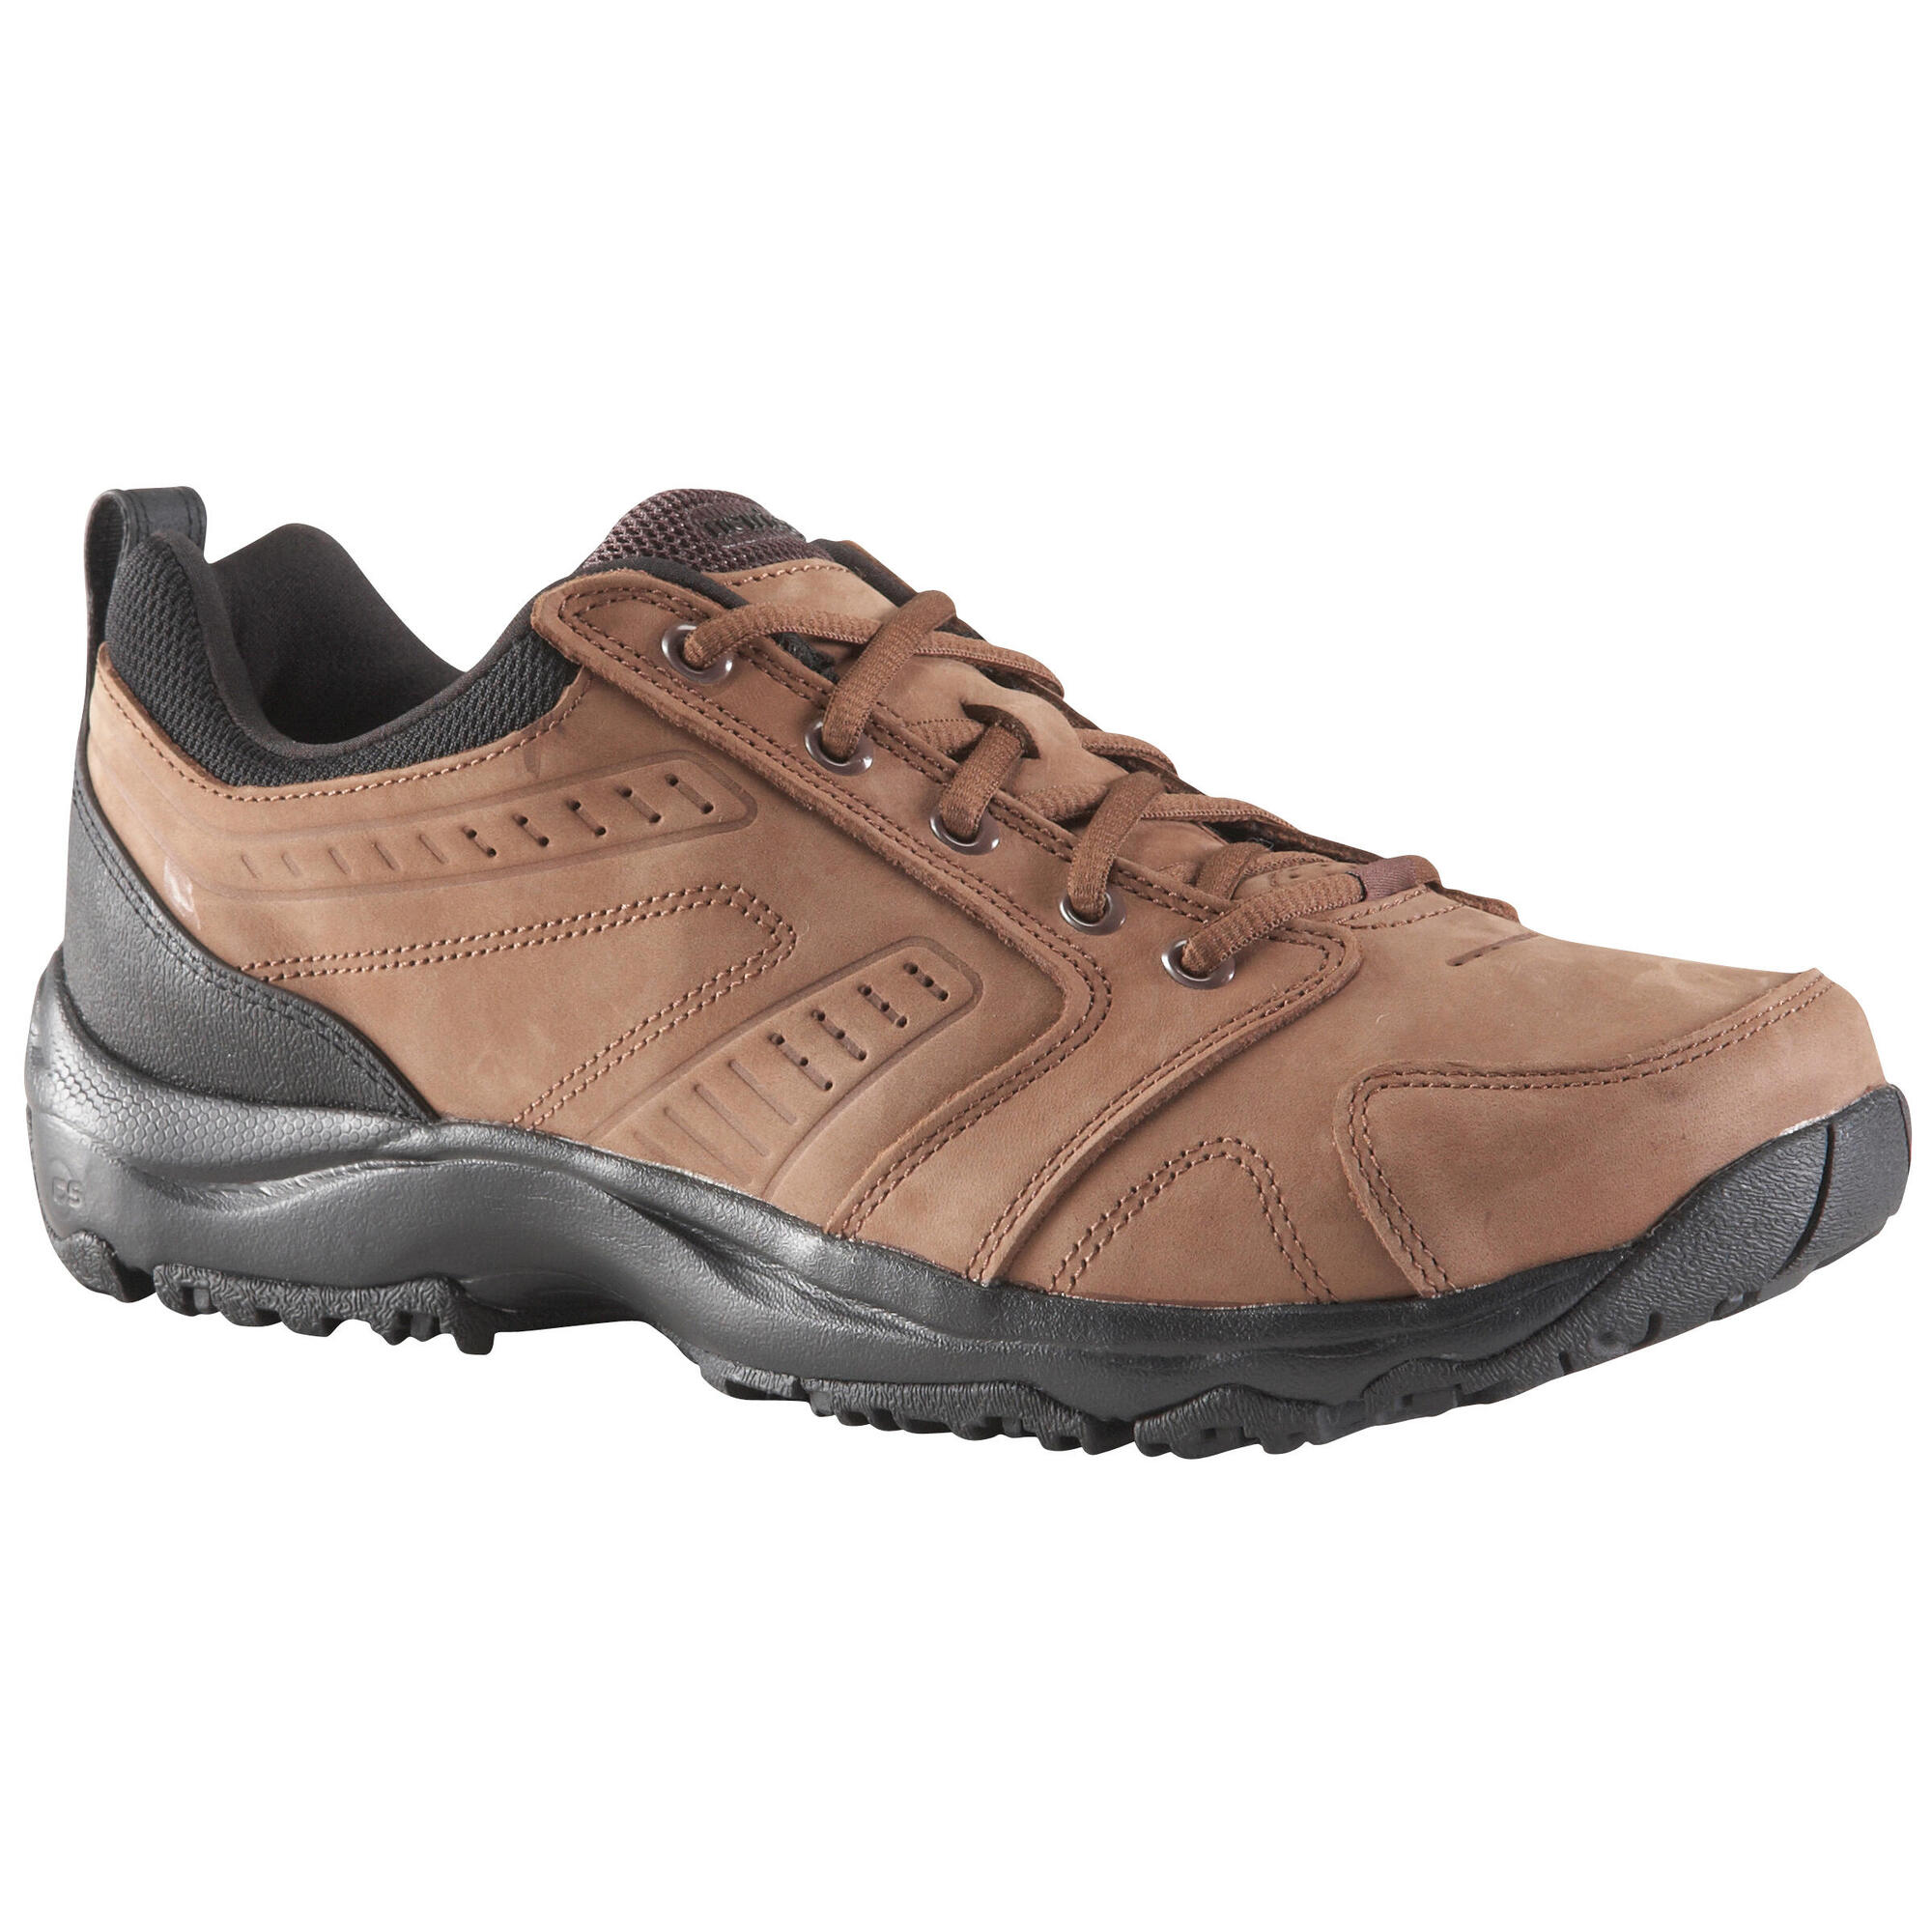 Fitness Walking Shoes - Brown Leather 